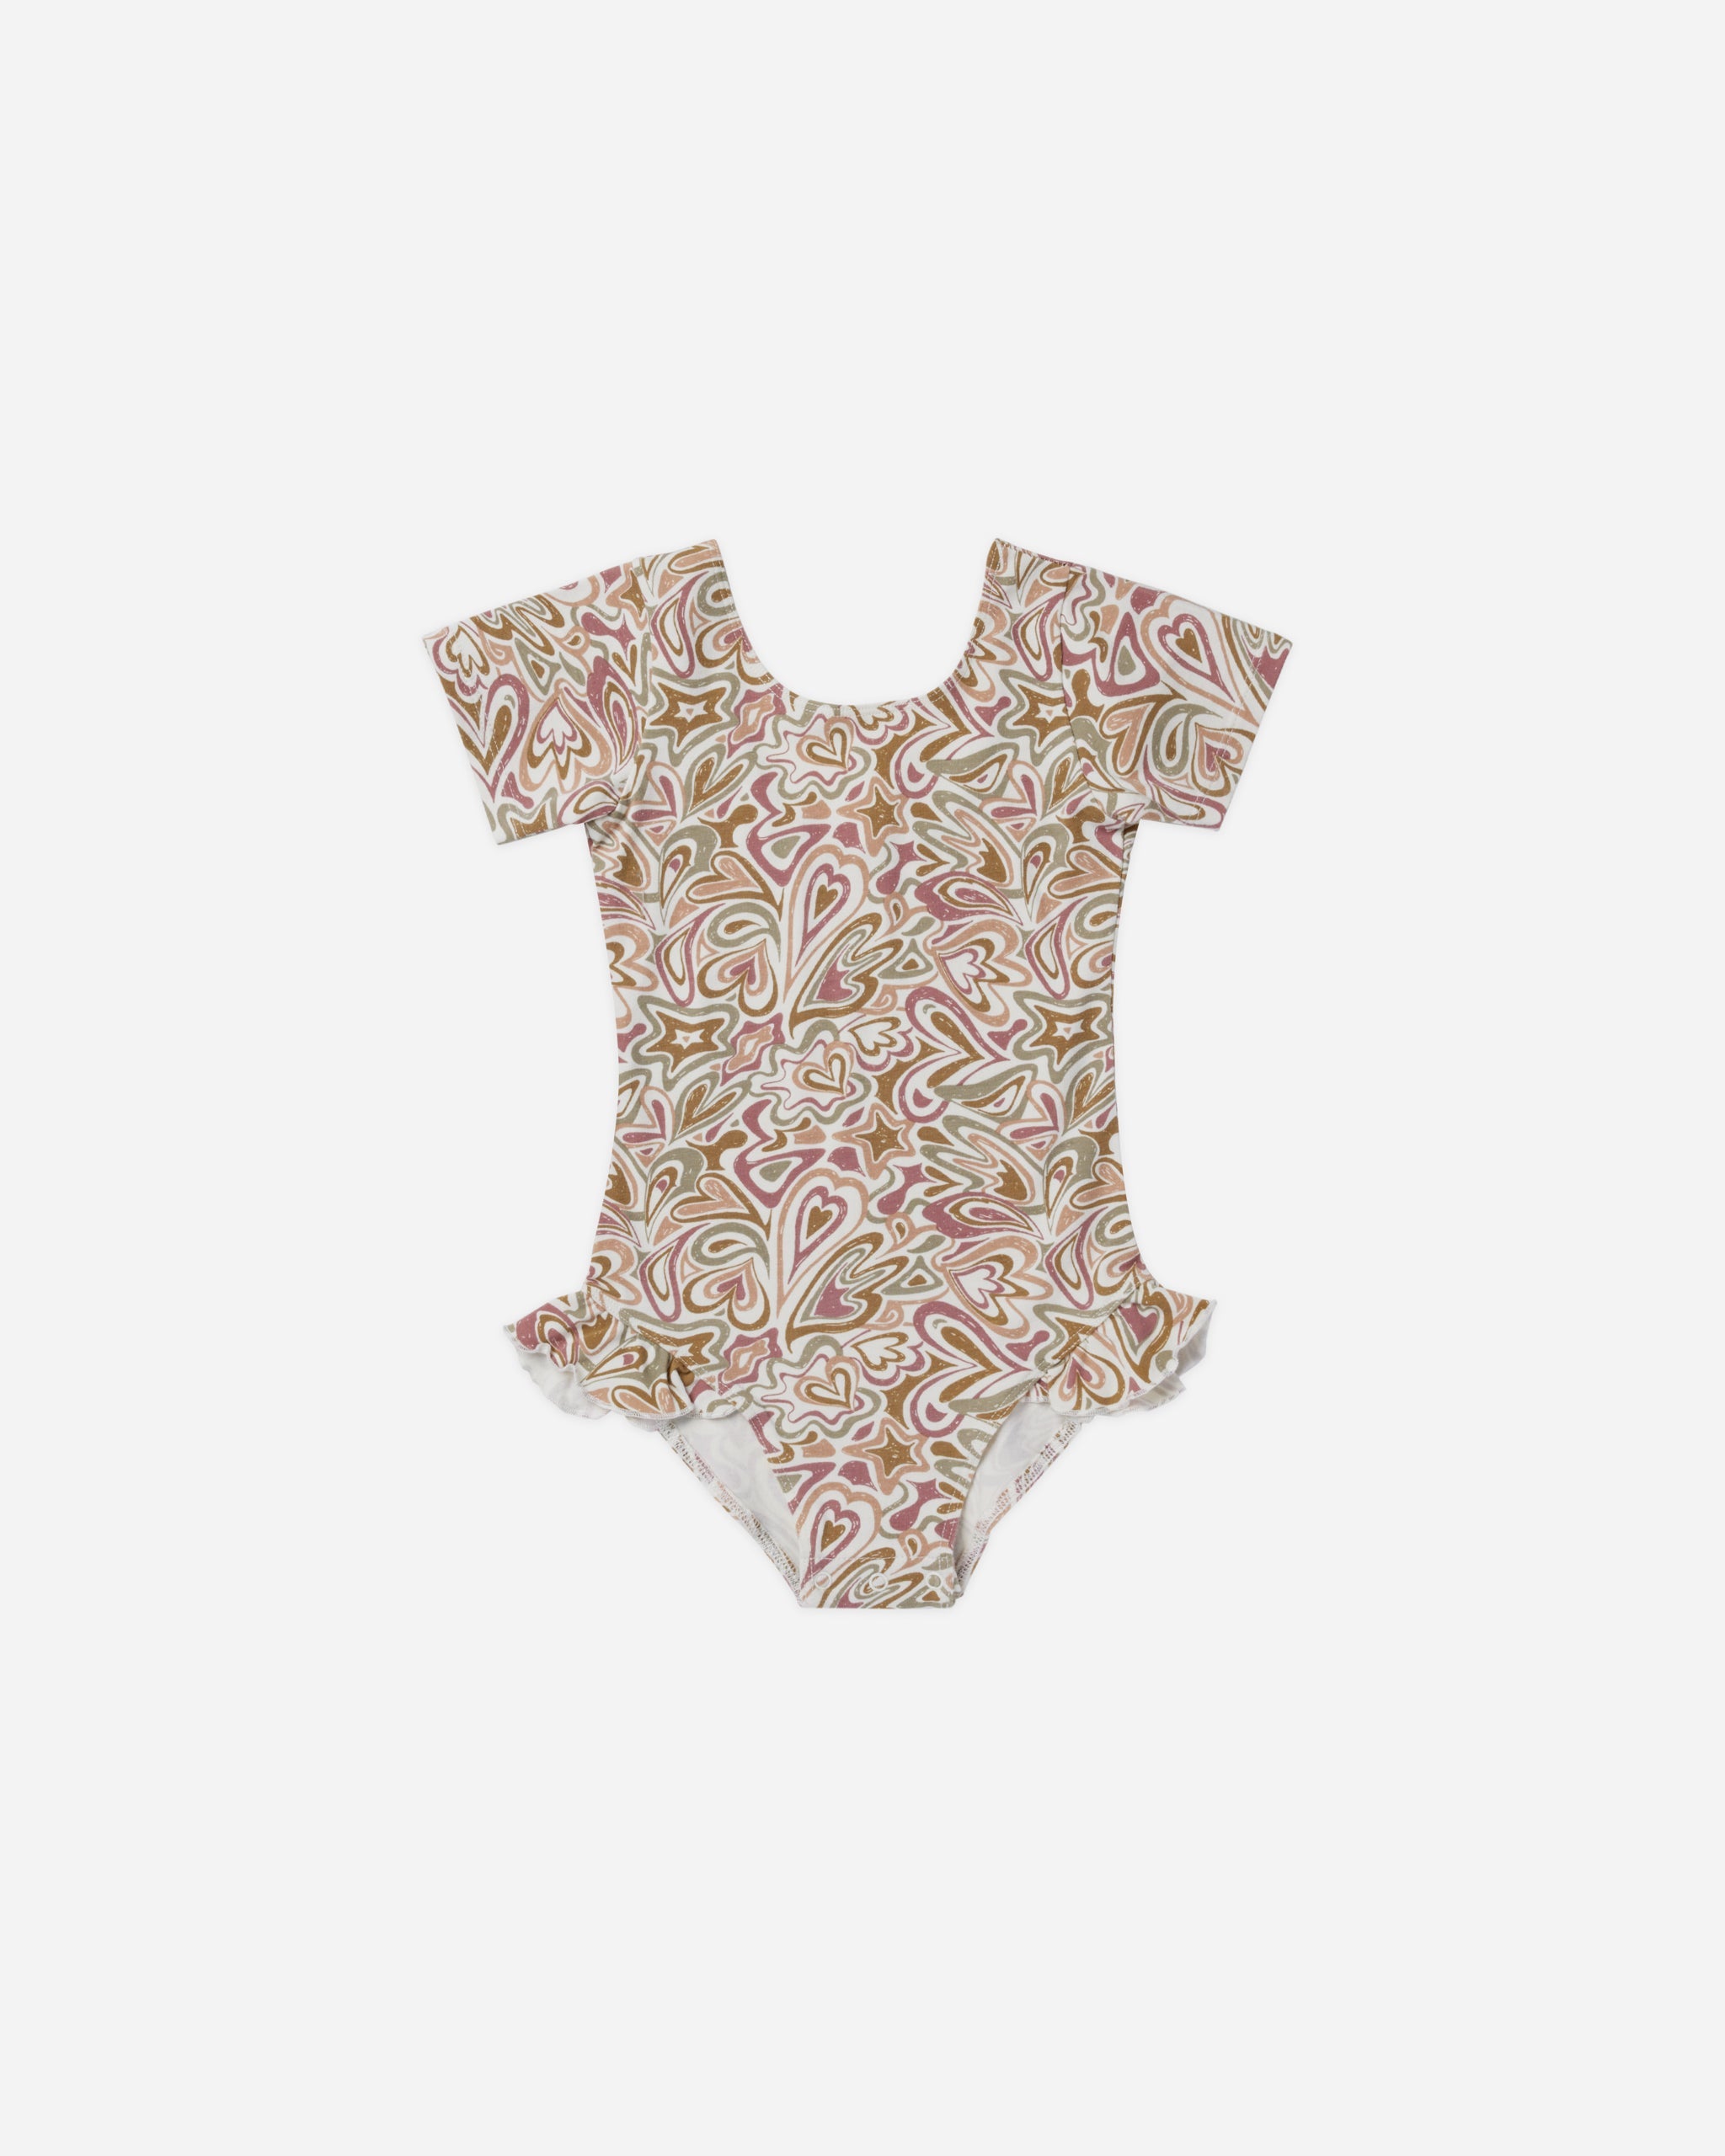 Leotard || Groovy - Rylee + Cru | Kids Clothes | Trendy Baby Clothes | Modern Infant Outfits |